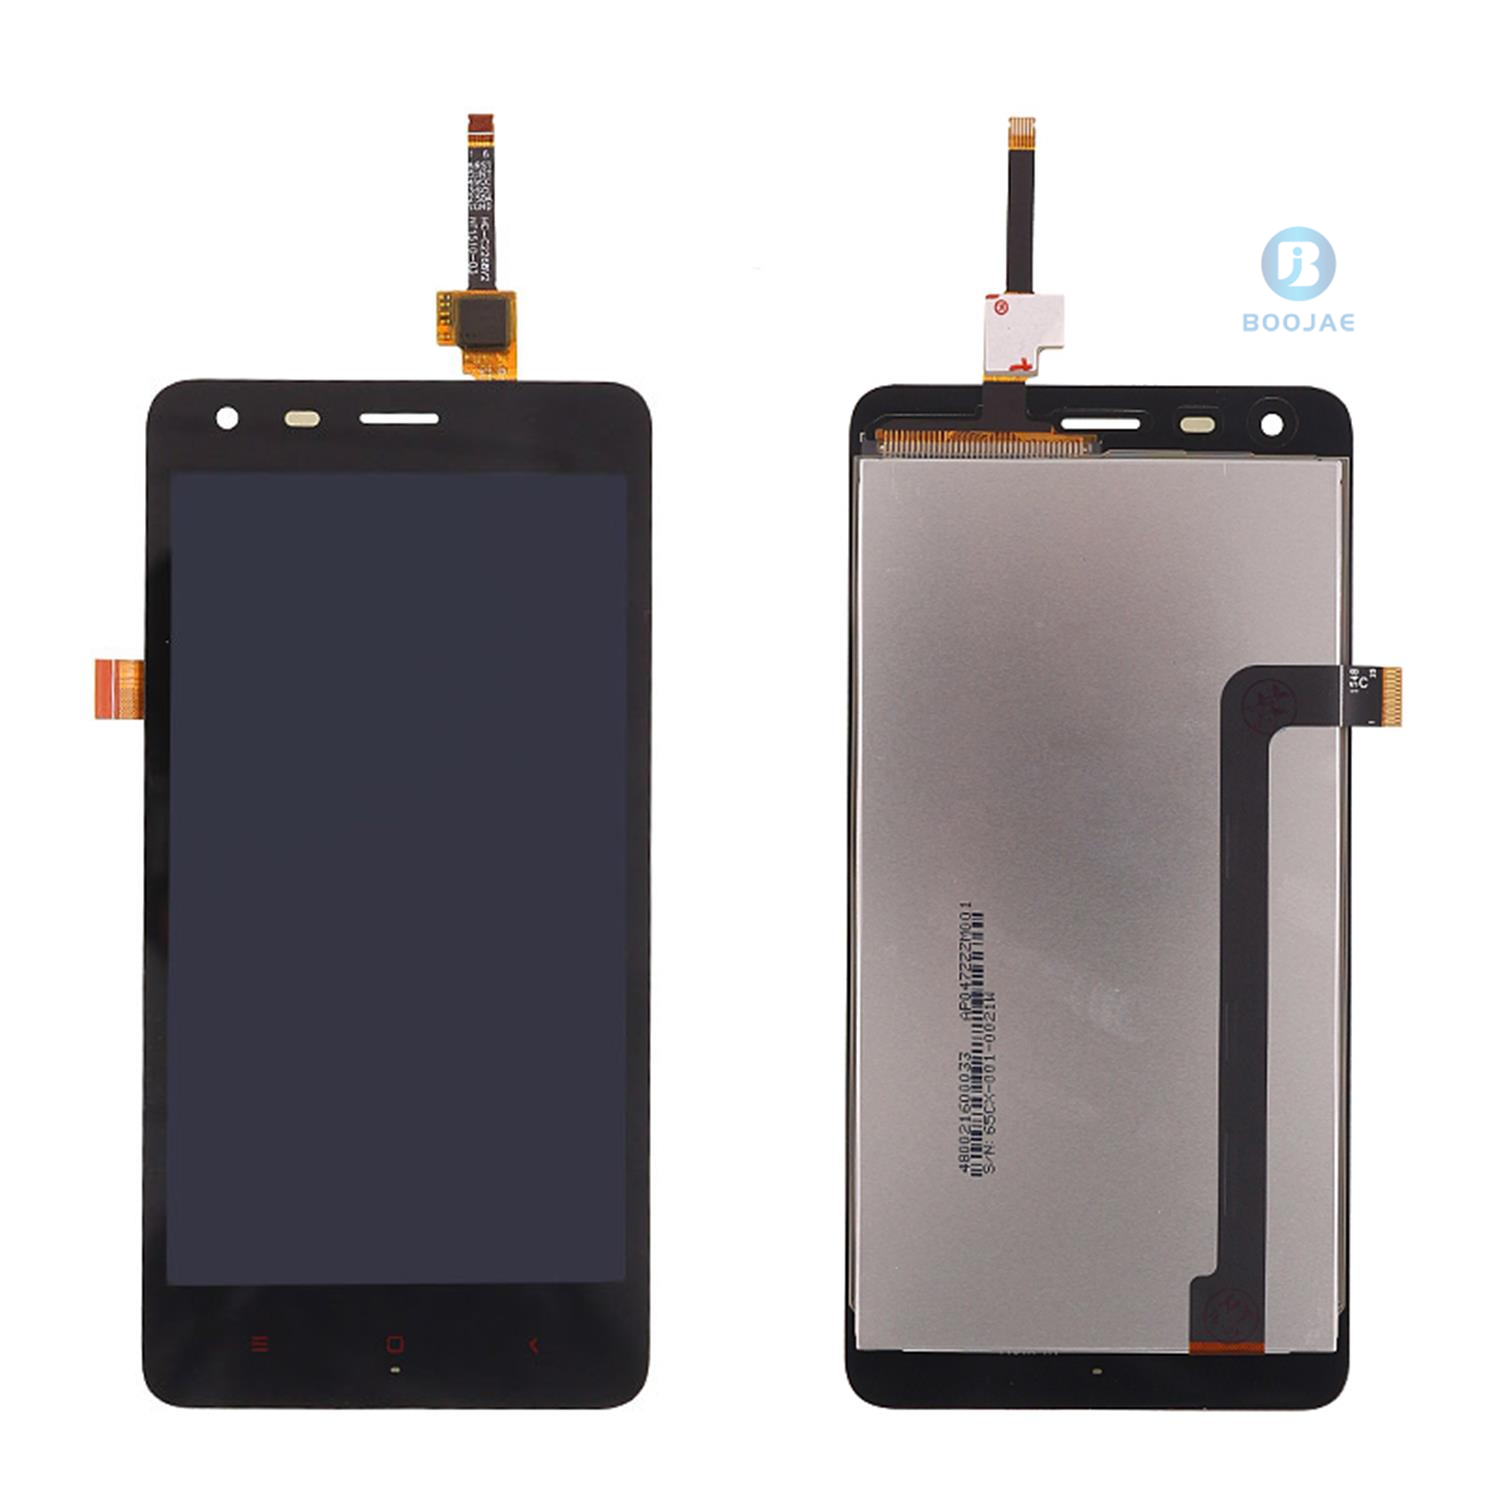 For Xiaomi Redmi 2 LCD Screen Display and Touch Panel Digitizer Assembly Replacement